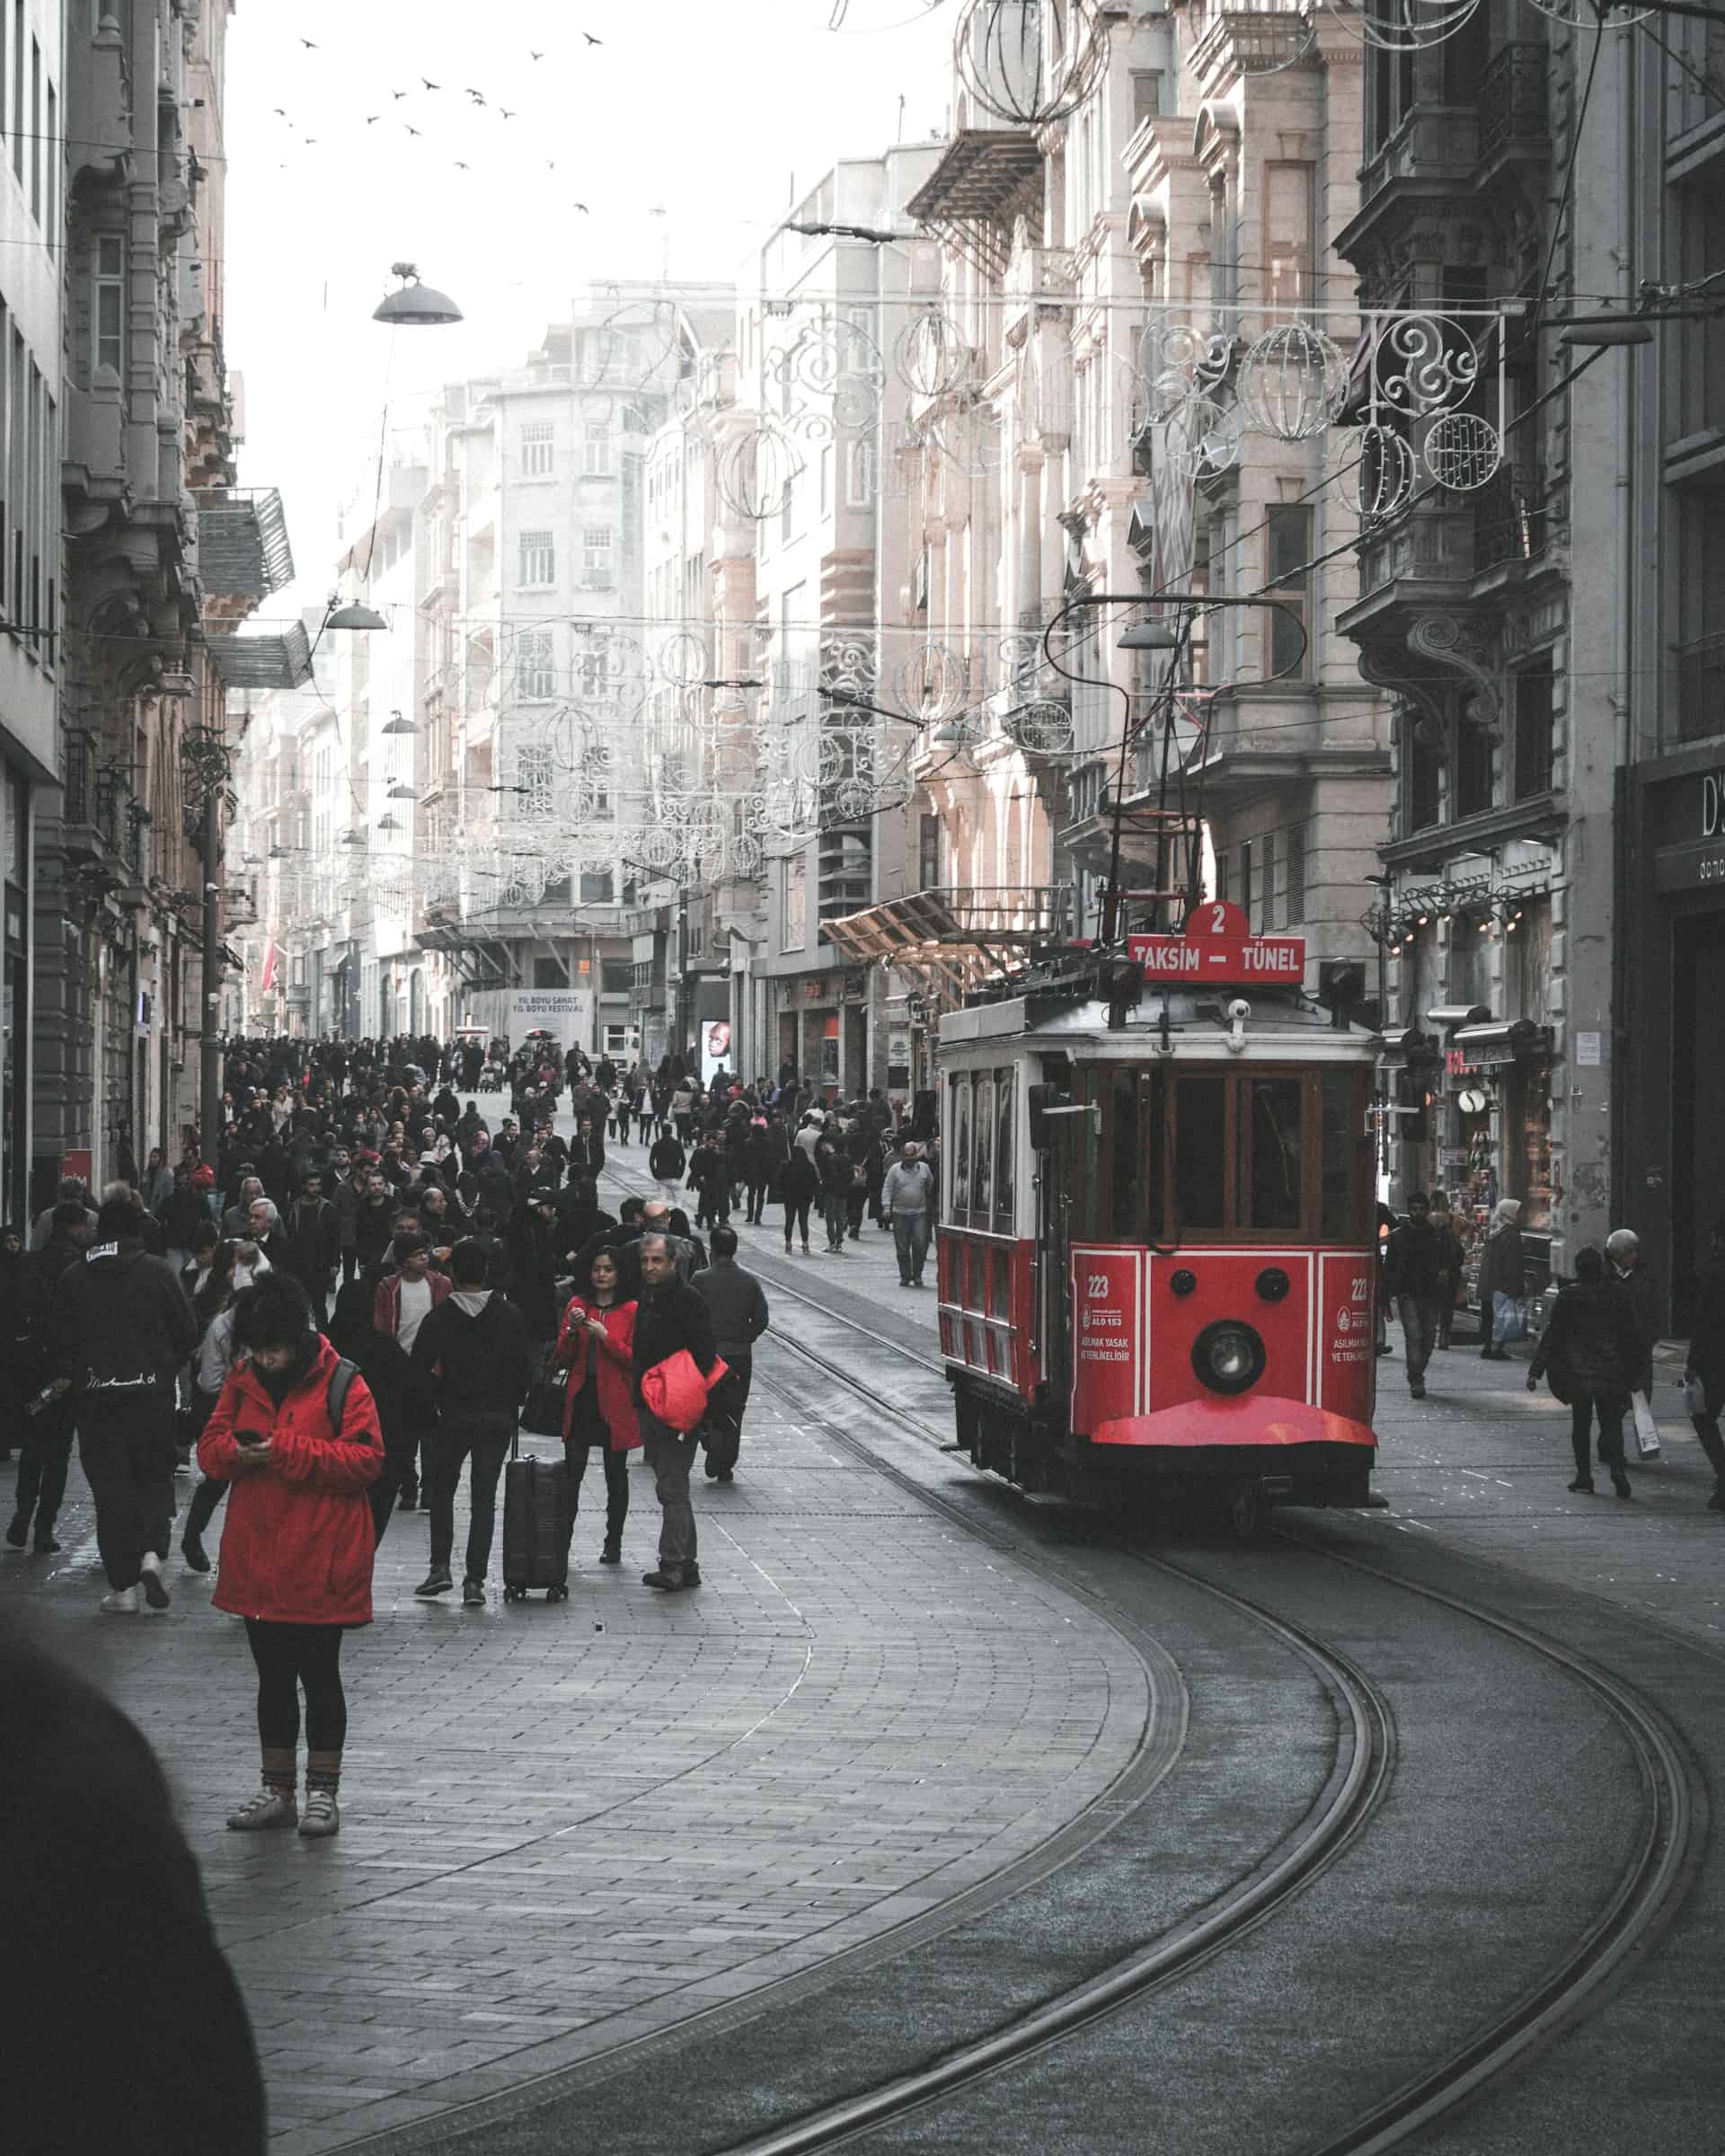 Best things to do in Istanbul Turkey - Pinar Tarhan - Historic tram lines run in each side of the city by Fatih Encan on Unsplash